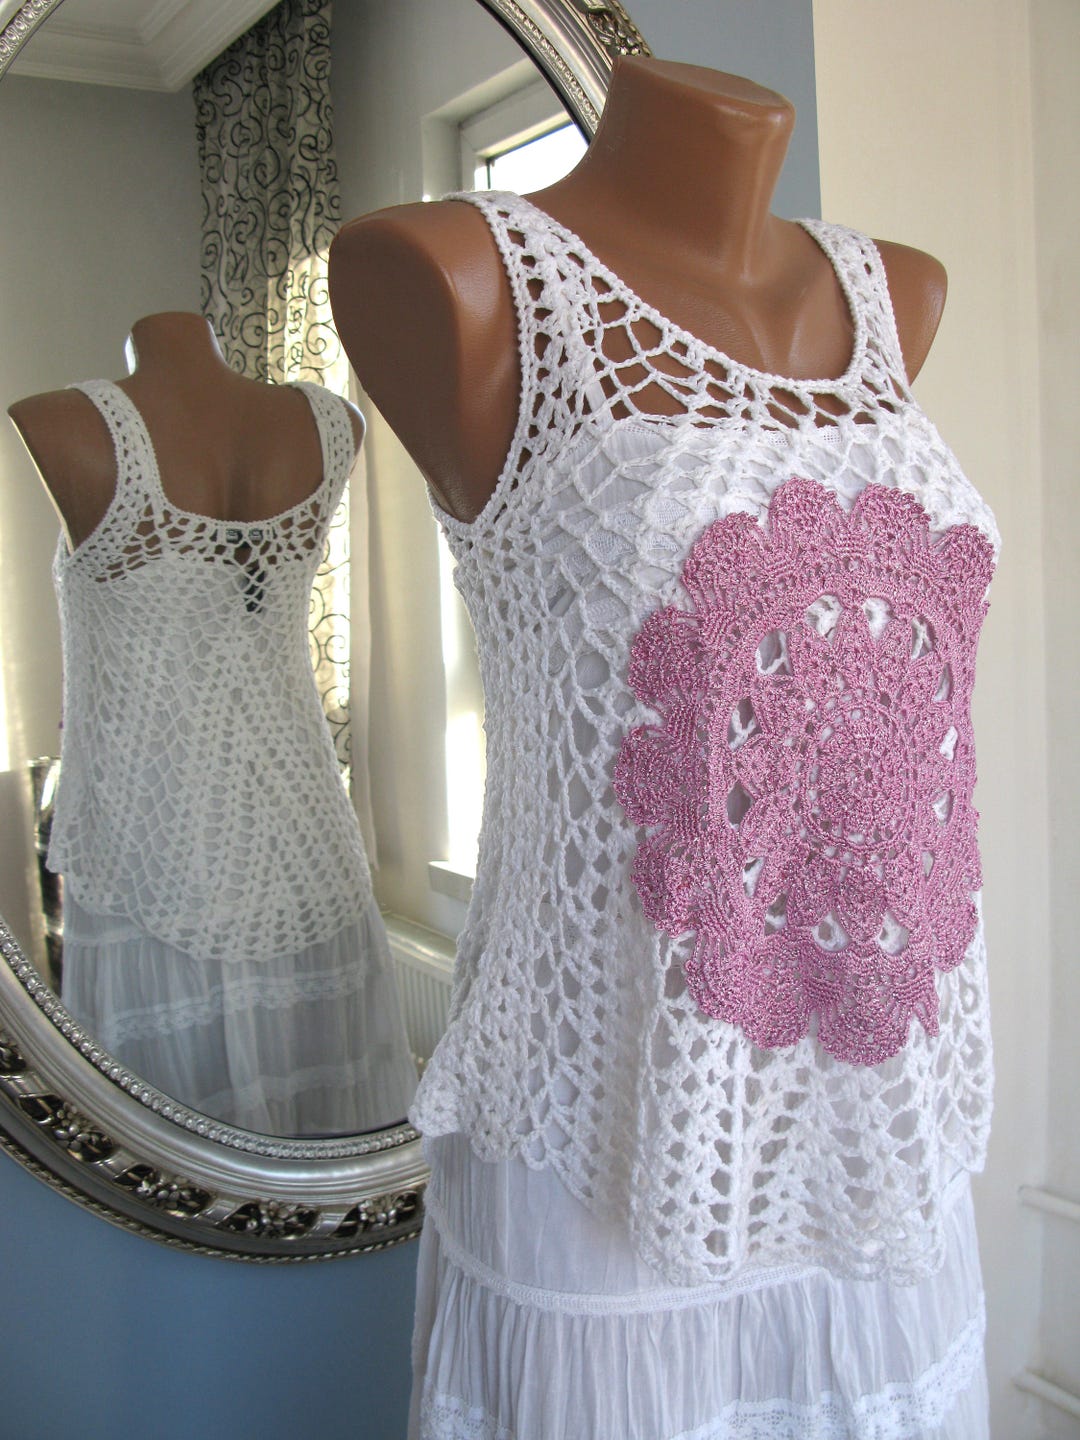 Crochet Top With Doily/boho White Top/ S Size - Etsy